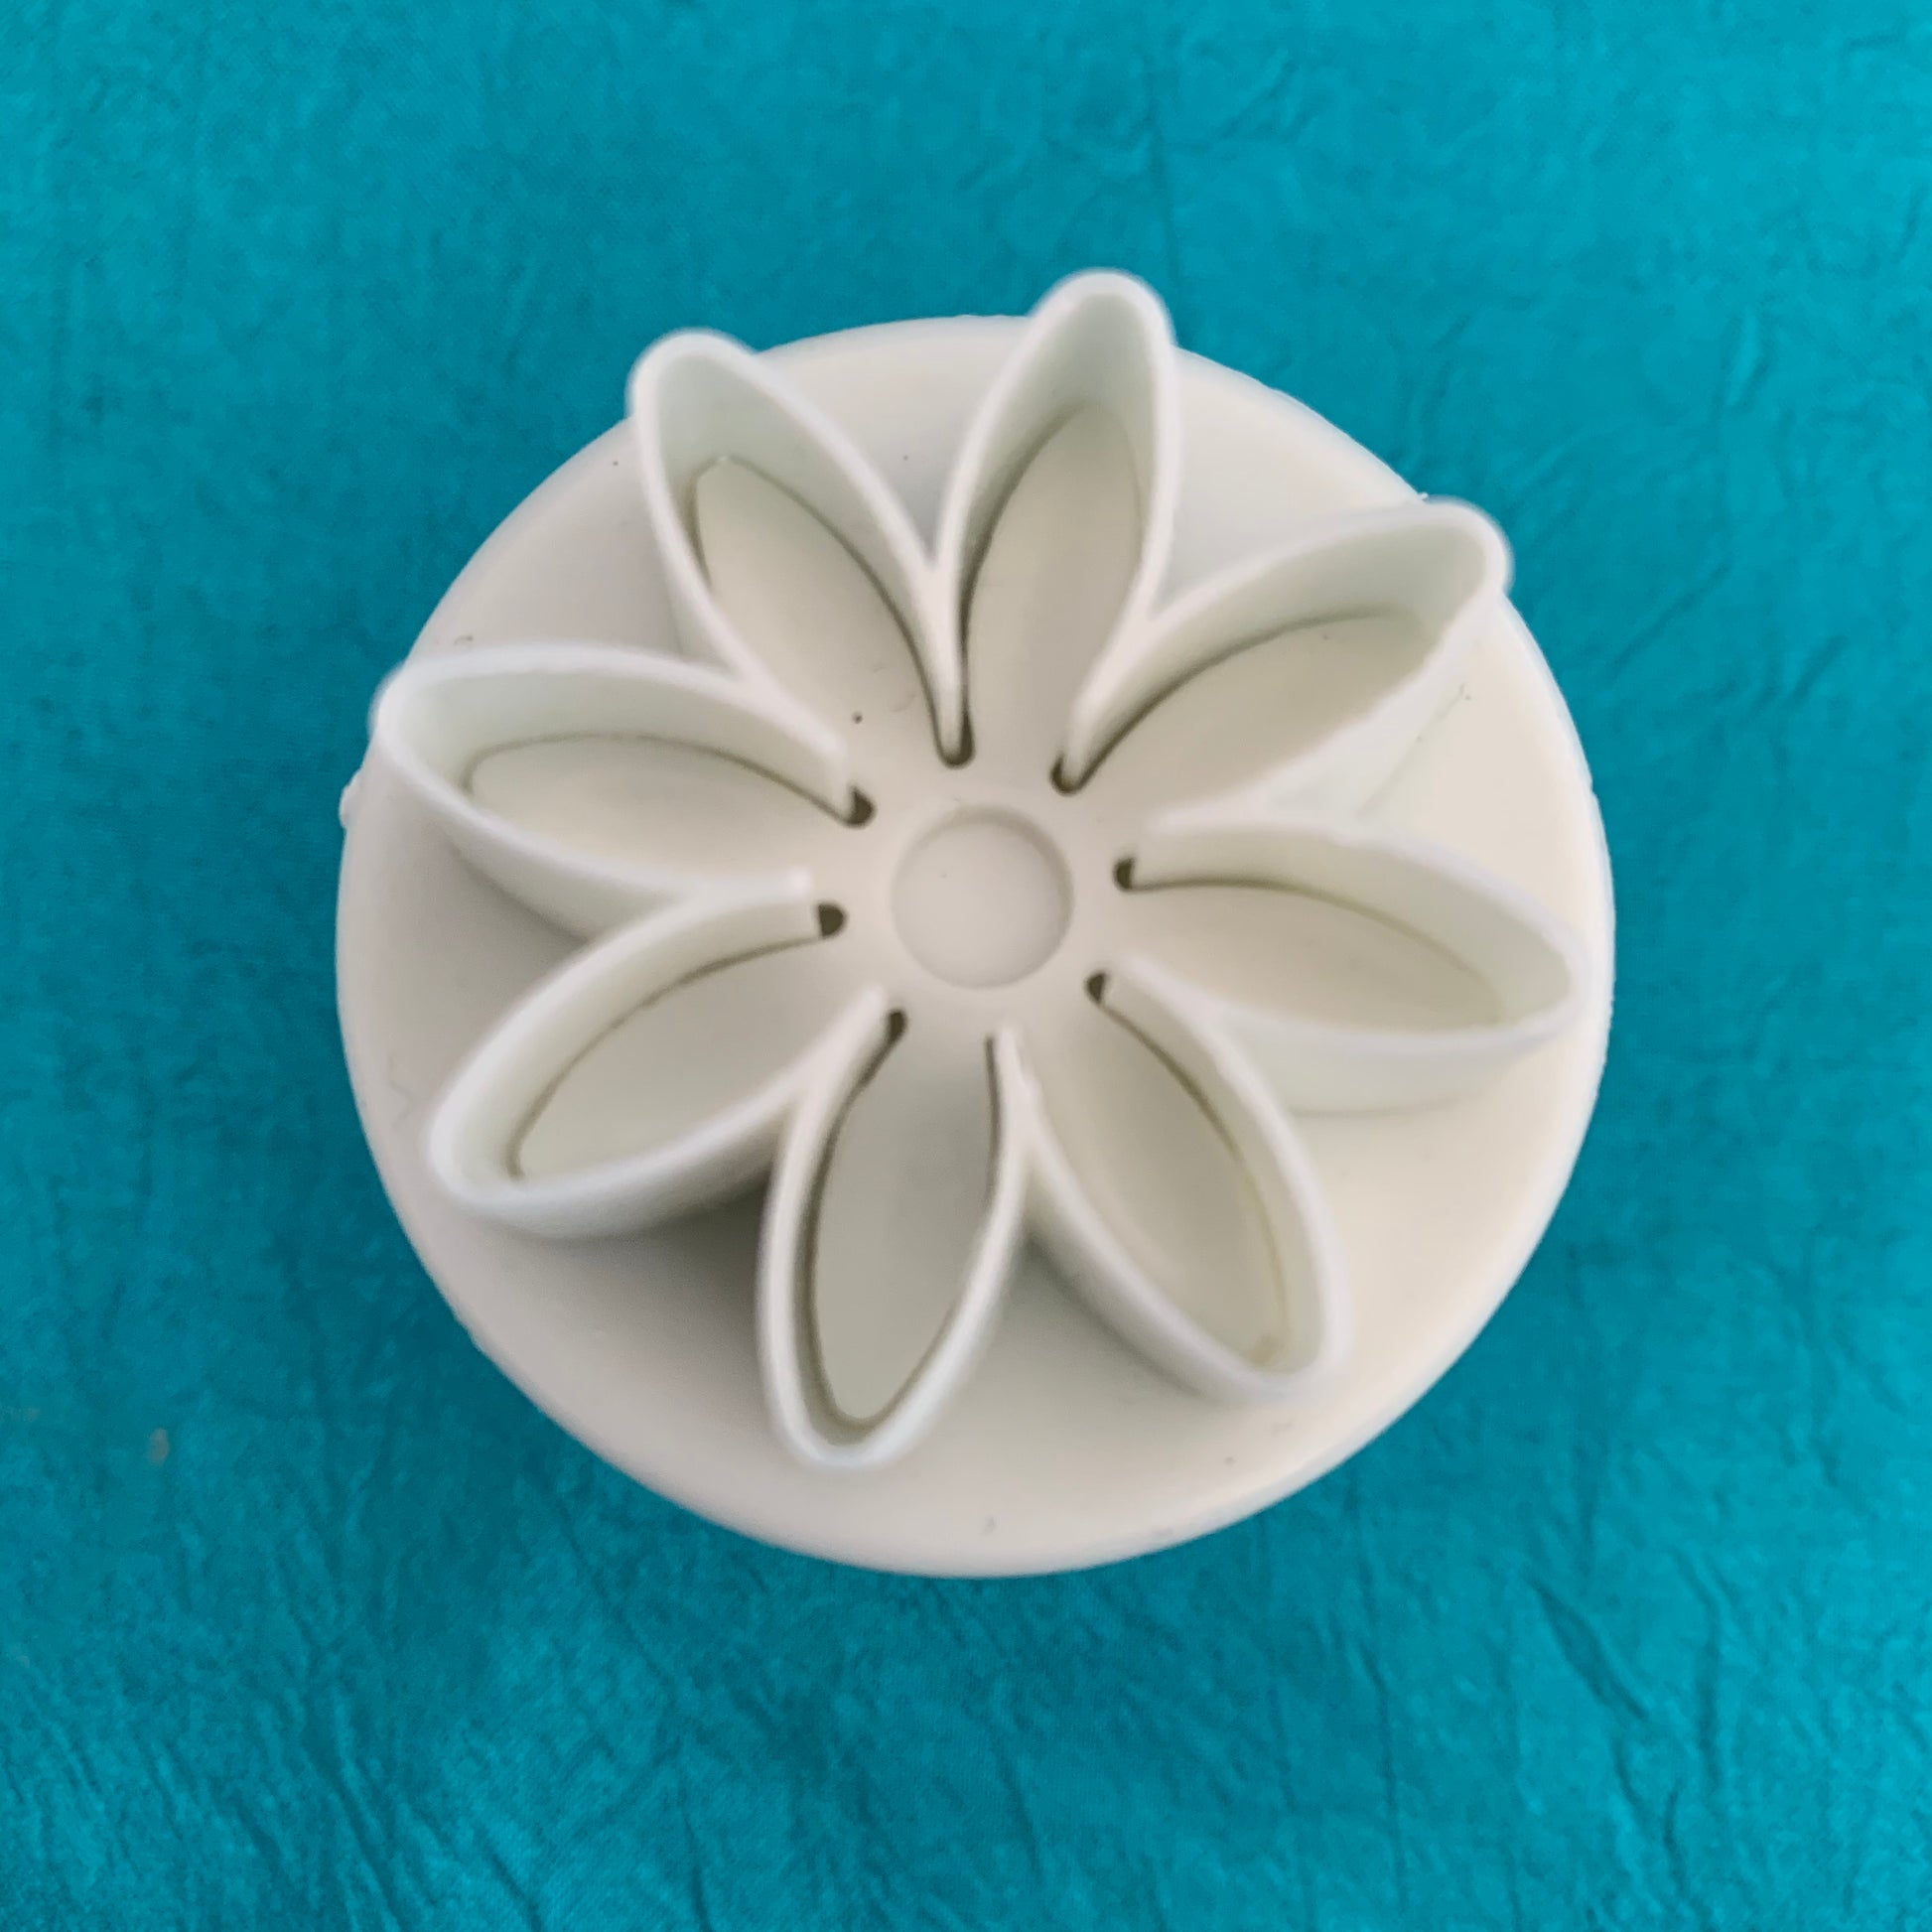 Embossed Half Daisy and Stem Clay Cutter Set, Flower Shape Pendant, Floral  Shape, Spring Clay Cutter, Clay Mold, 3D Polymer Clay Cutter Set 